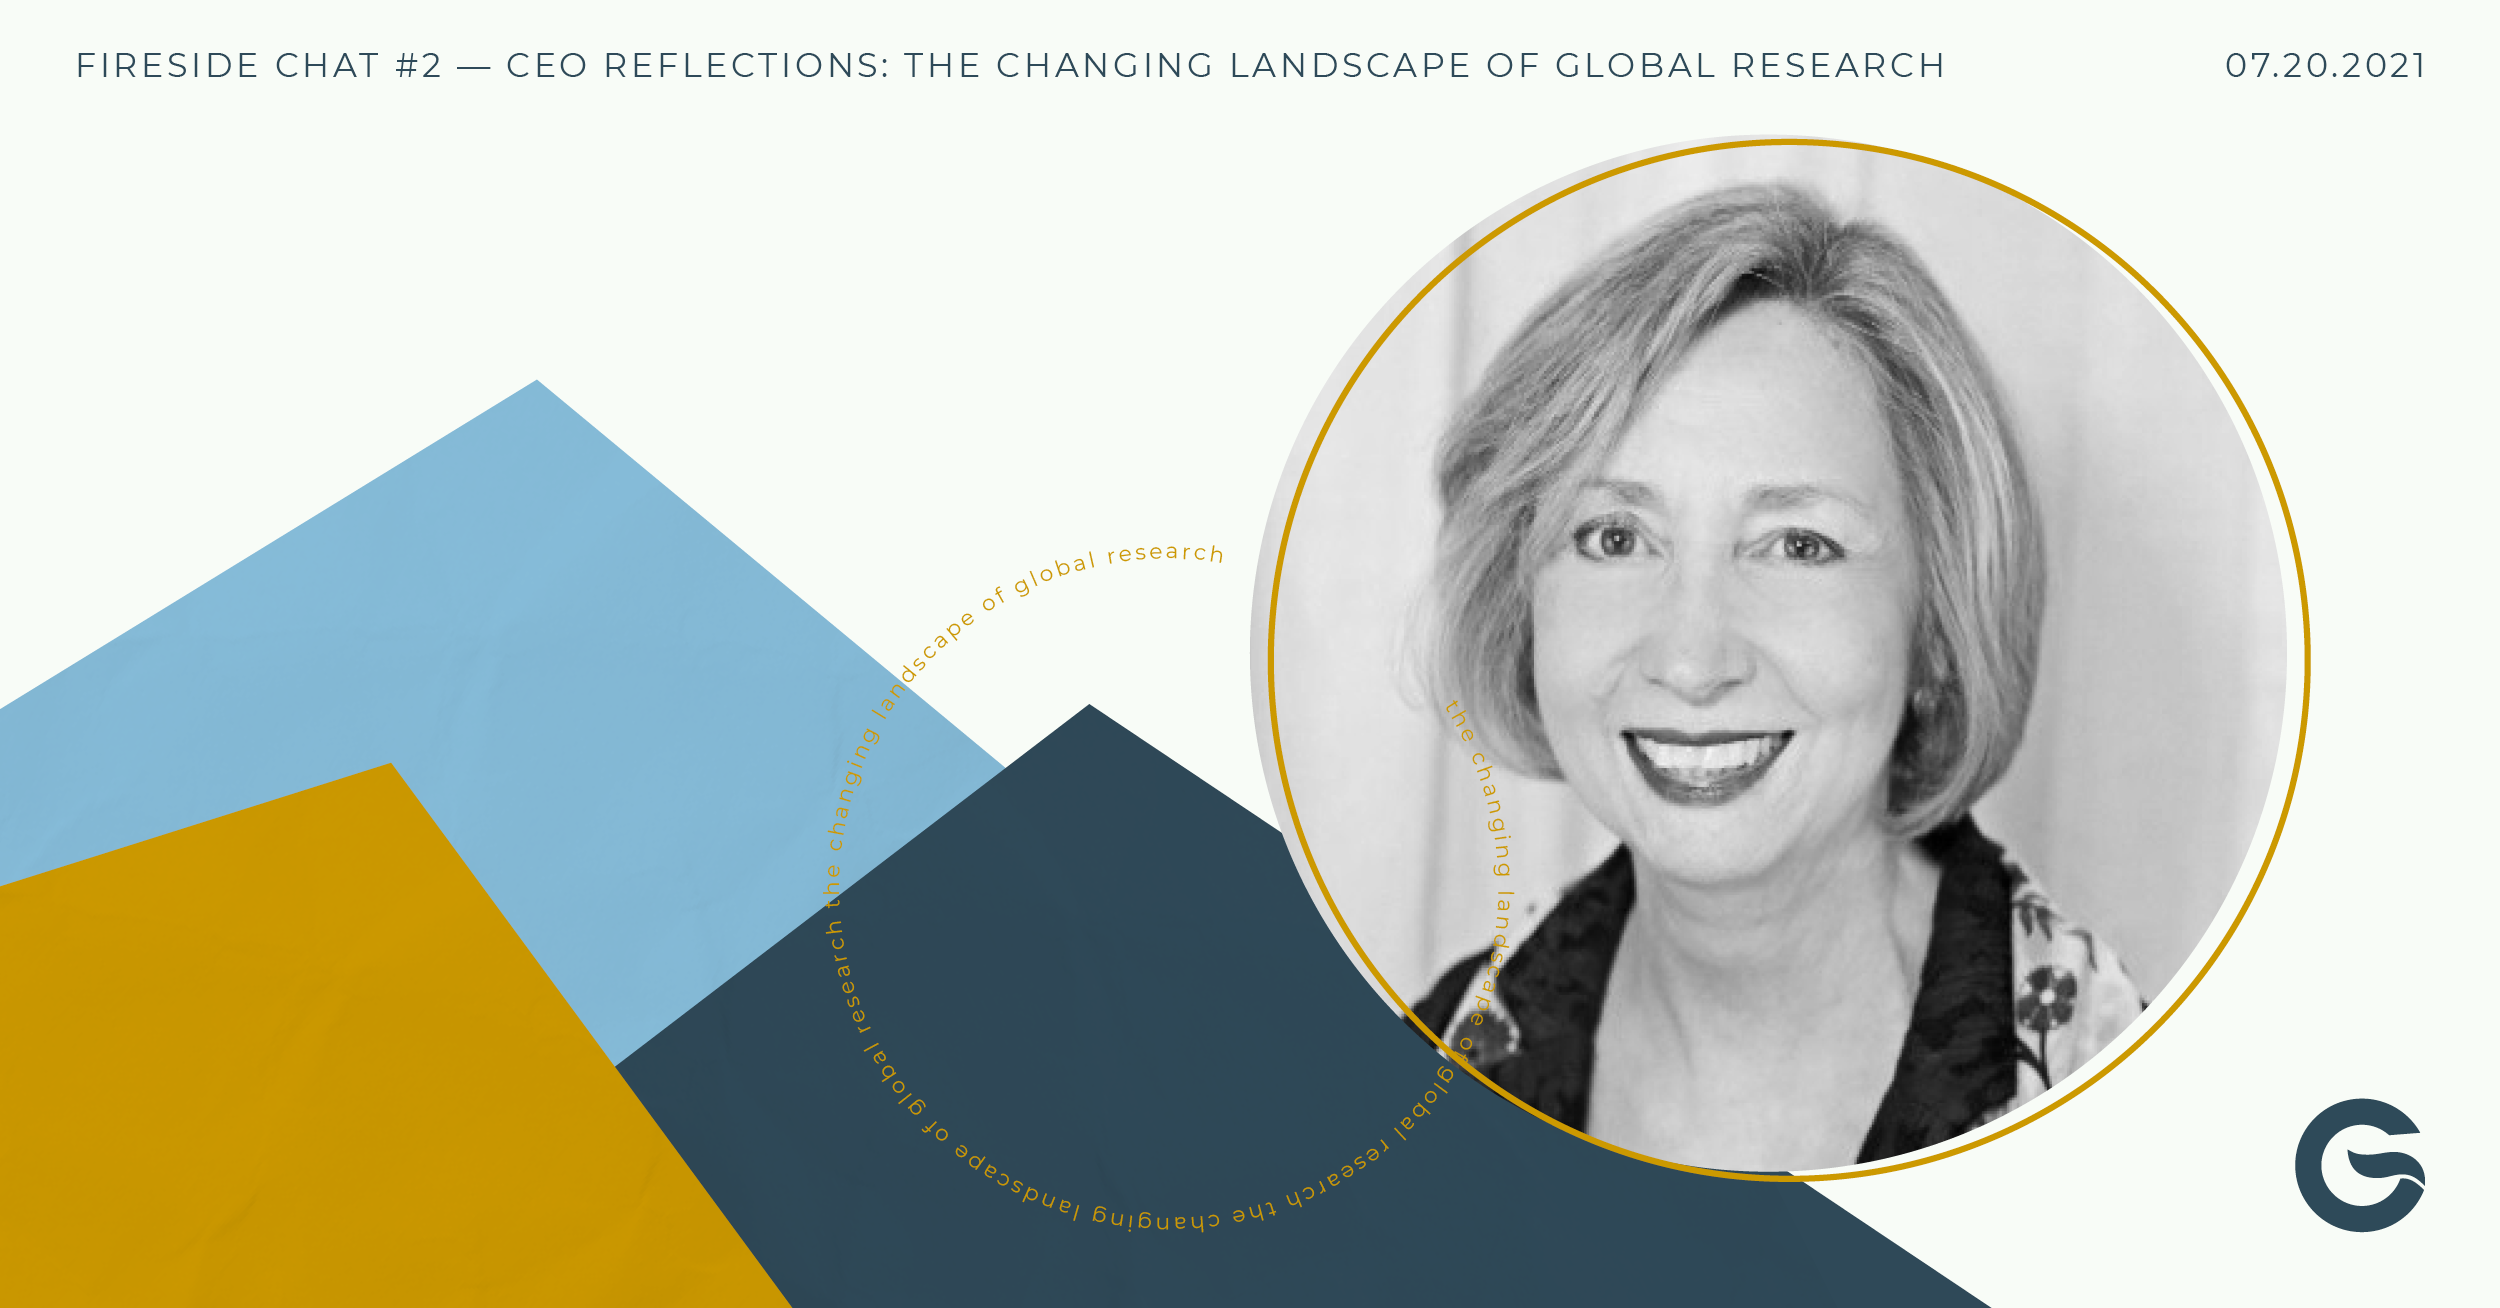 Fireside Chat #2 - CEO Reflections: The Changing Landscape of Global Research Image